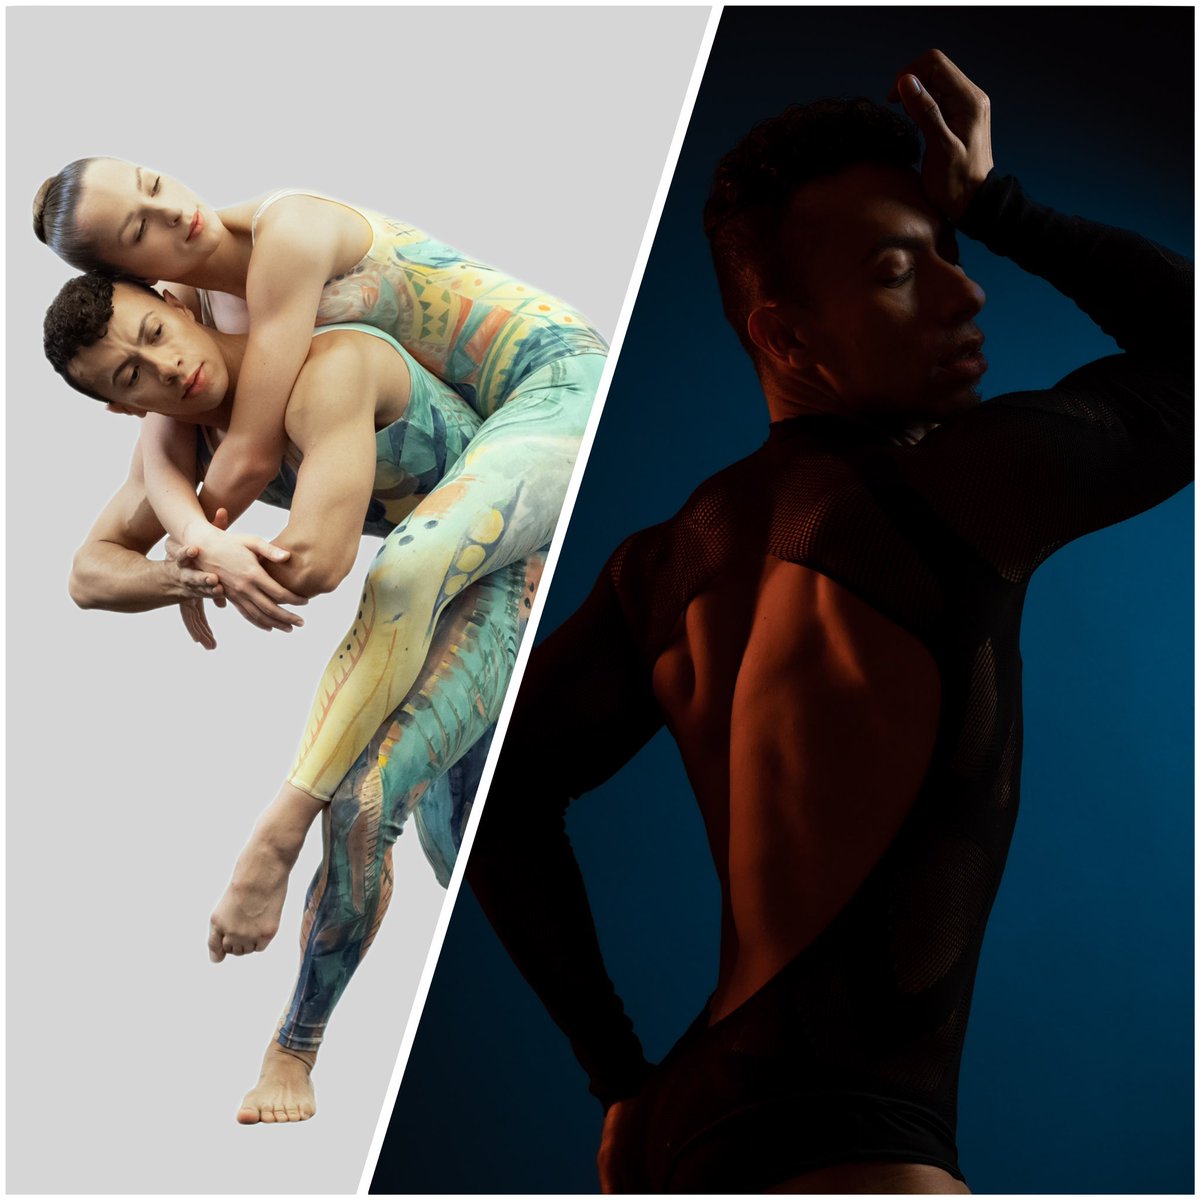 #London you’re up! Eliot Smith Dance is here for one night only and will be performing Paul Taylor’s “DUET” from 1964 and the revival of Eliot Smith’s recent work “HUMAN”. 🗓️ 03 July, 8pm 📍 @ChelseaTheatre Get yourself a ticket at: eliotsmithdance.com/pastandfuture